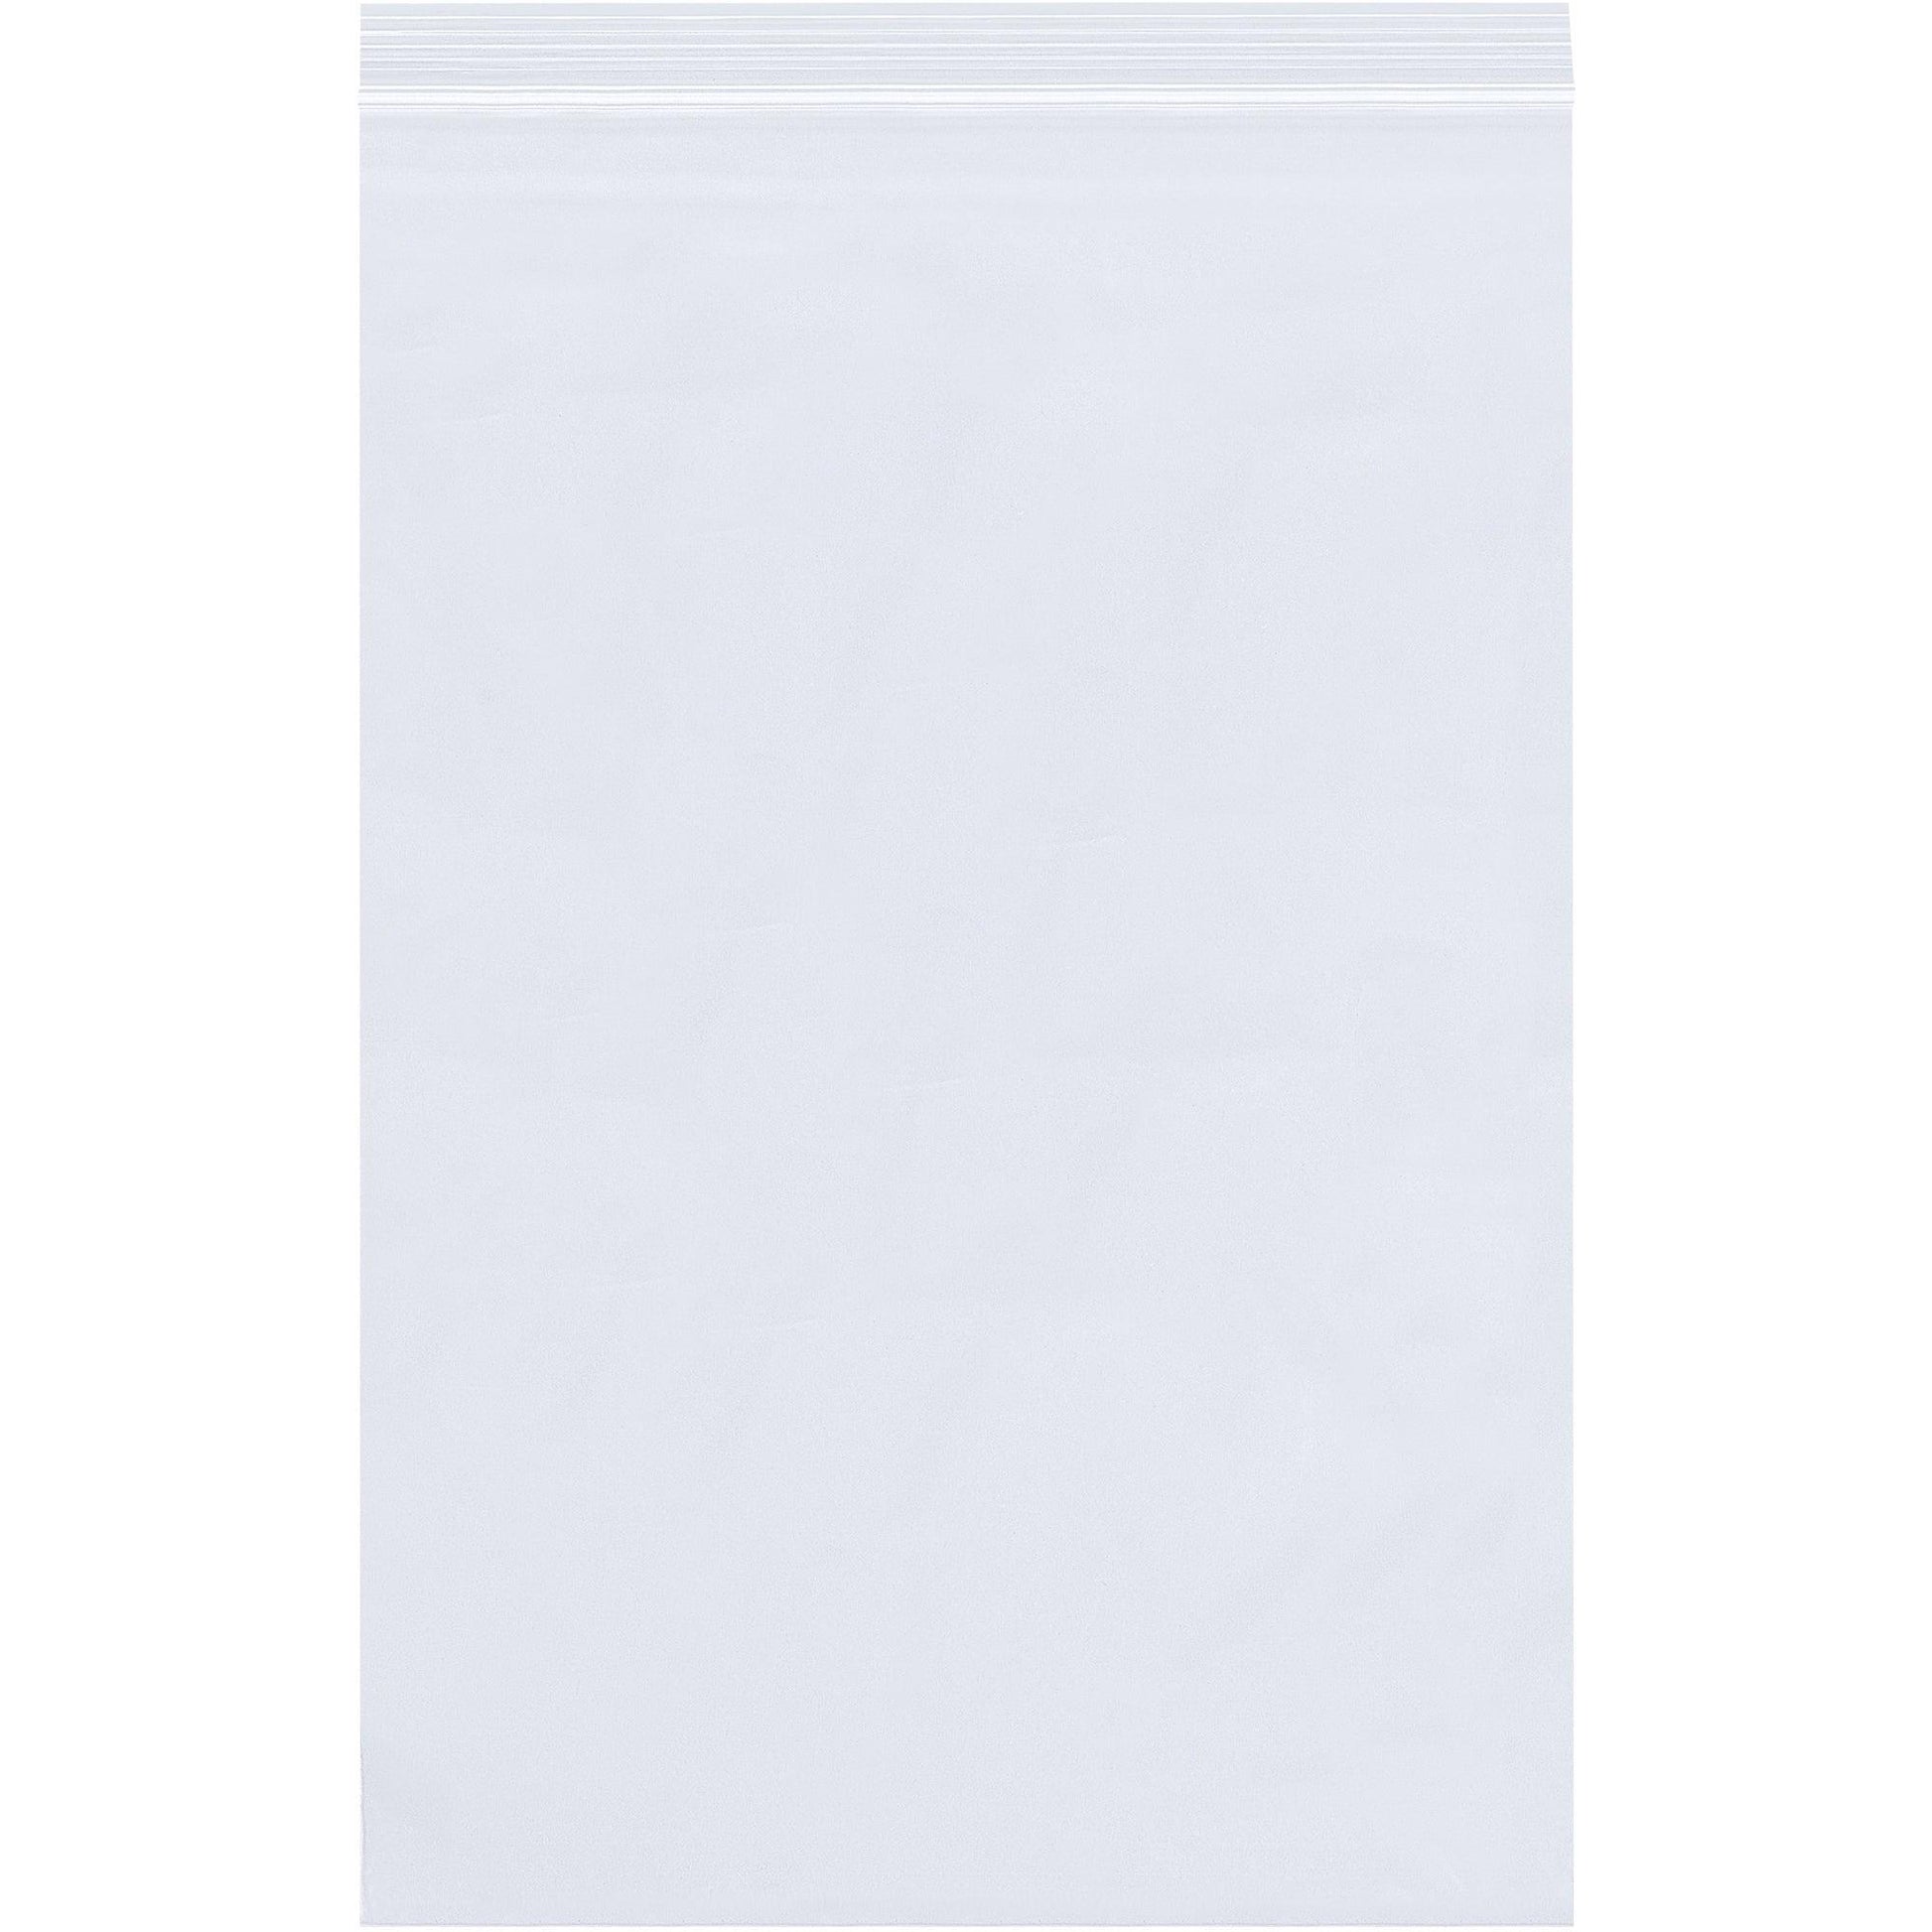 3 x 5" - 8 Mil Reclosable Poly Bags - PB3910